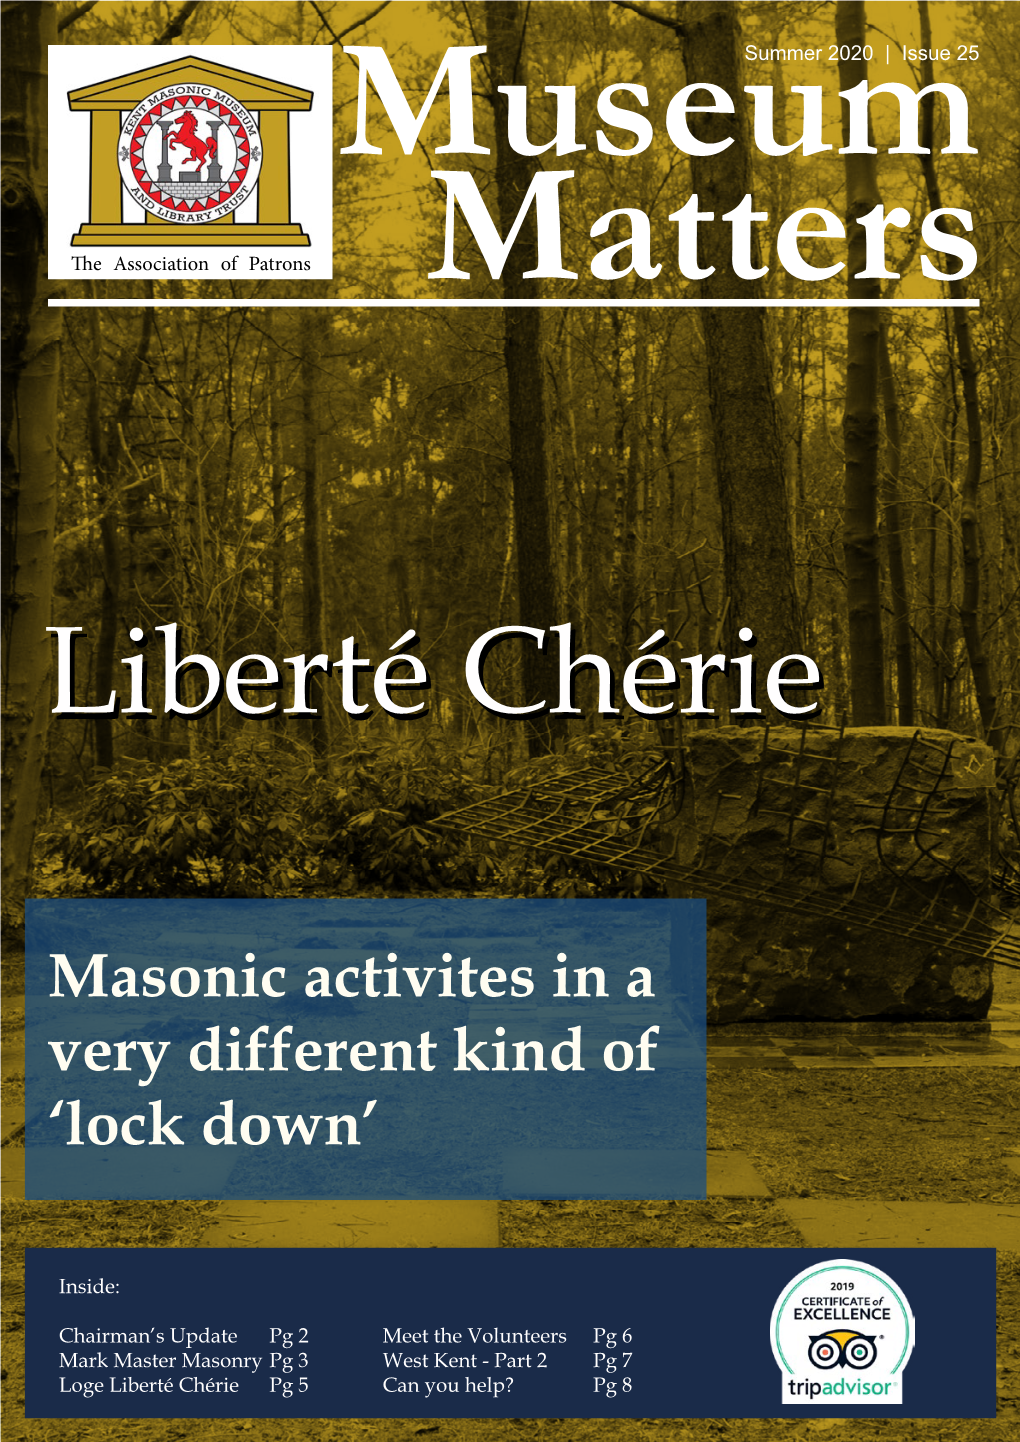 Masonic Activites in a Very Different Kind of 'Lock Down'